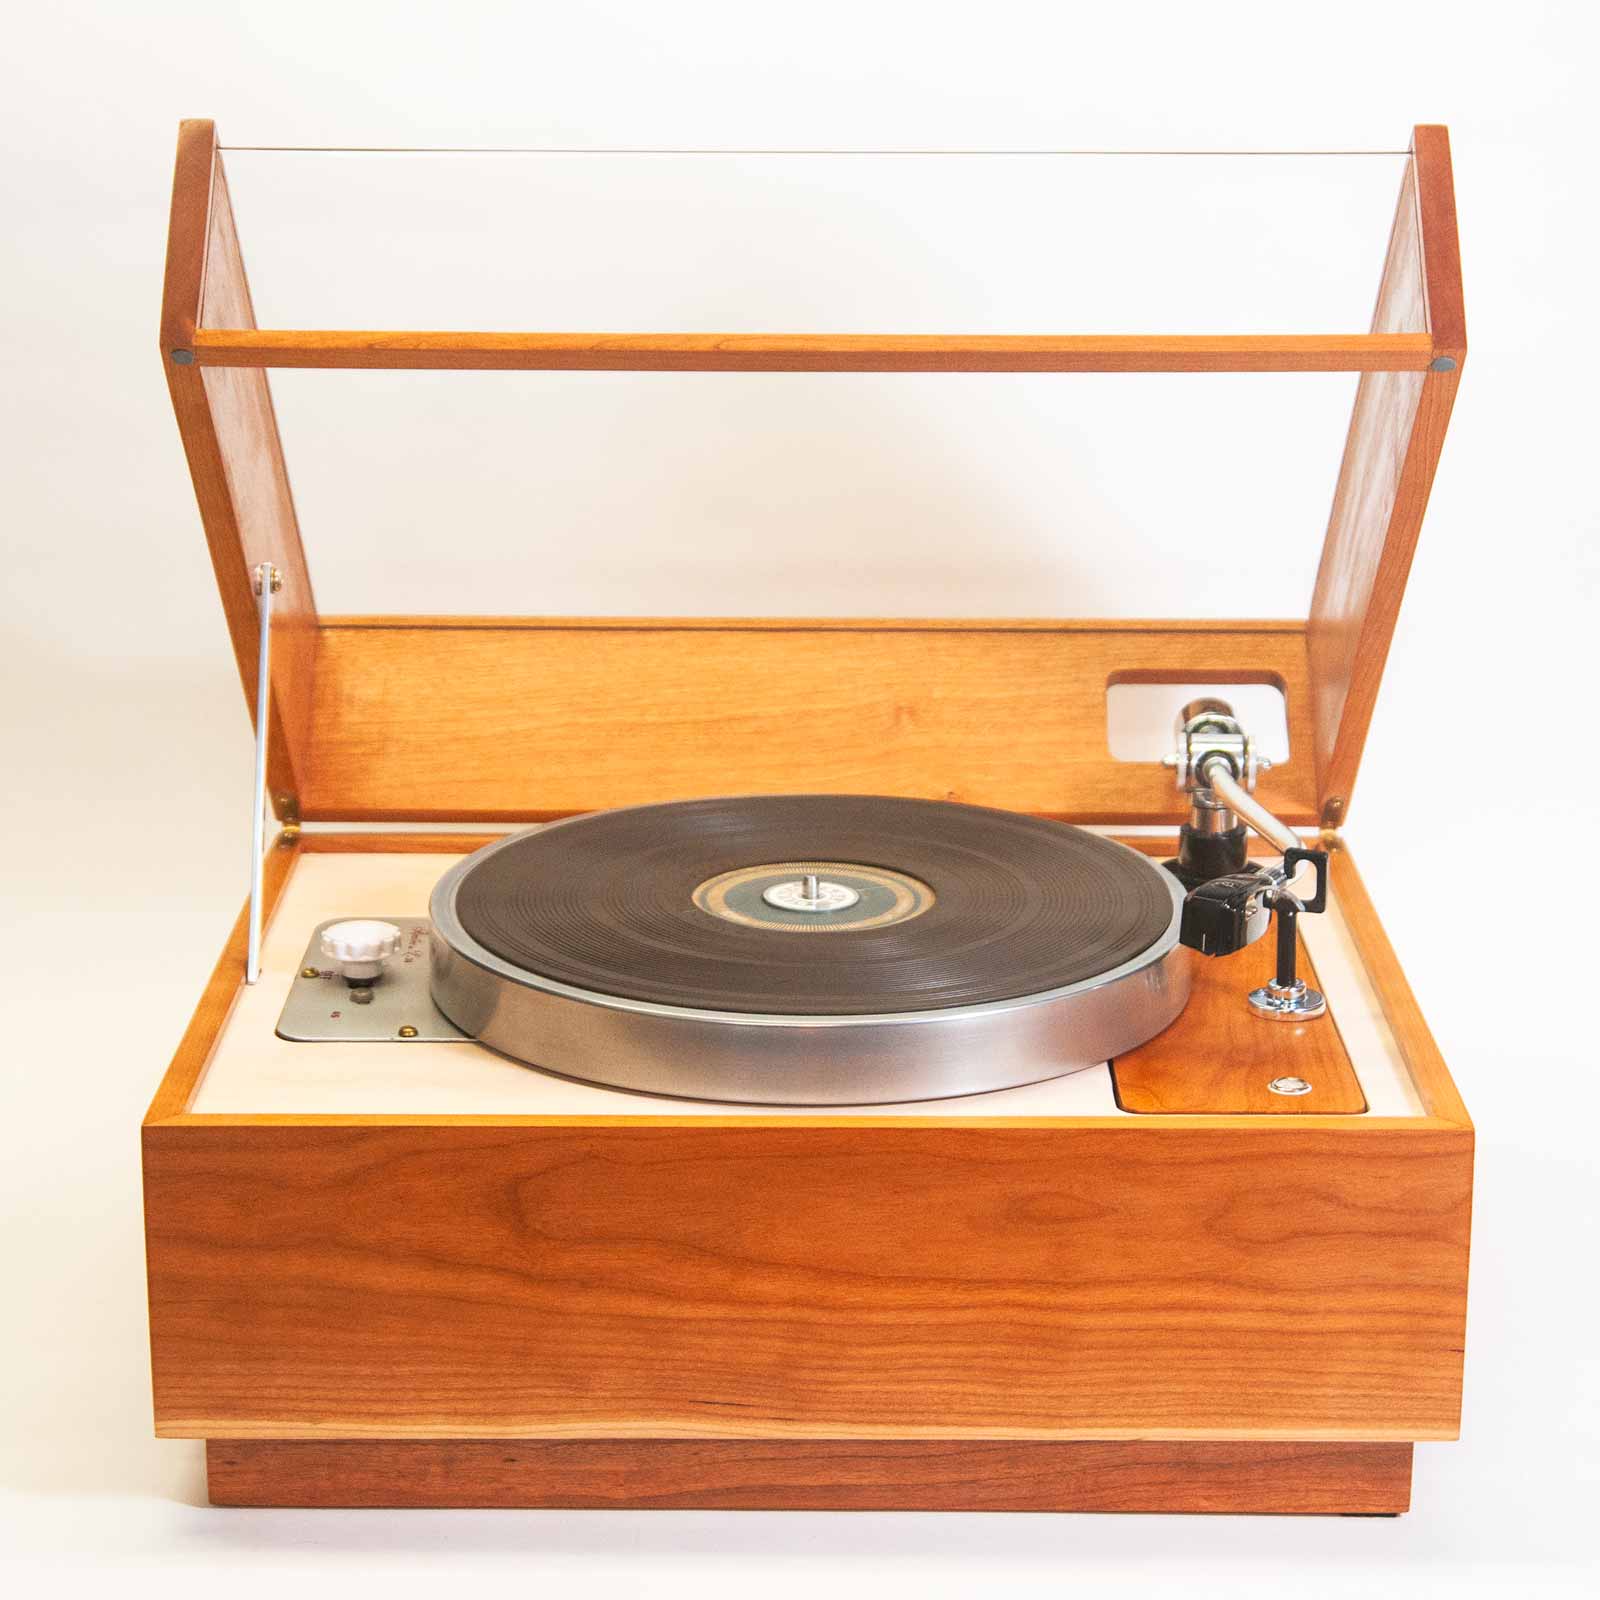 Rek-o-kut L-34 turntable, front view with dust cover raised